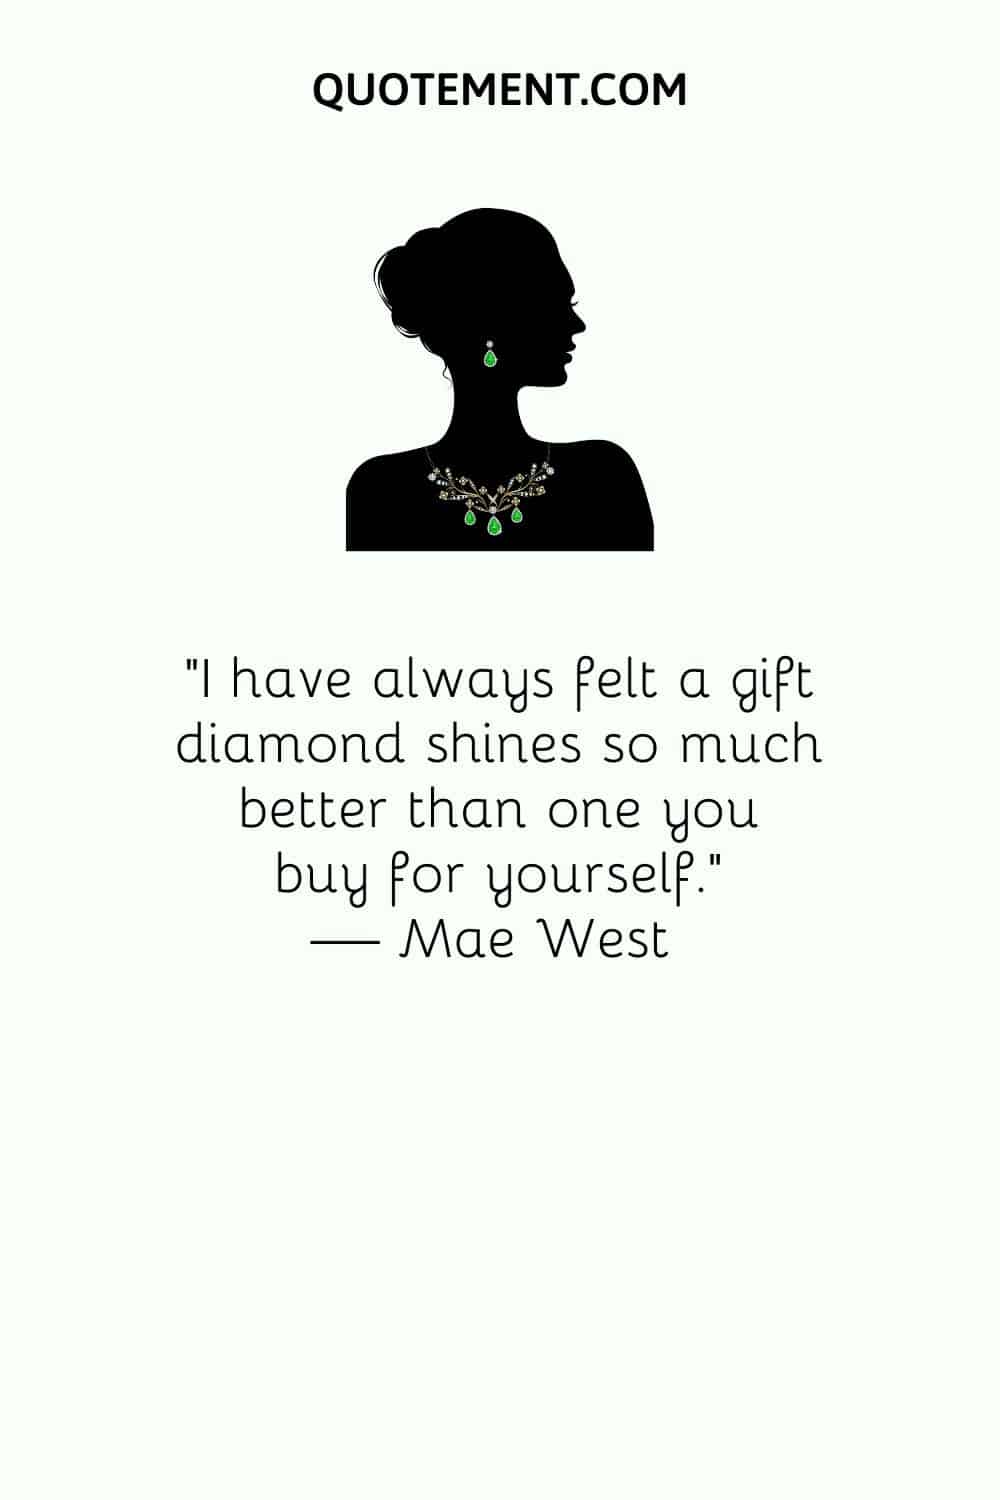 I have always felt a gift diamond shines so much better than one you buy for yourself